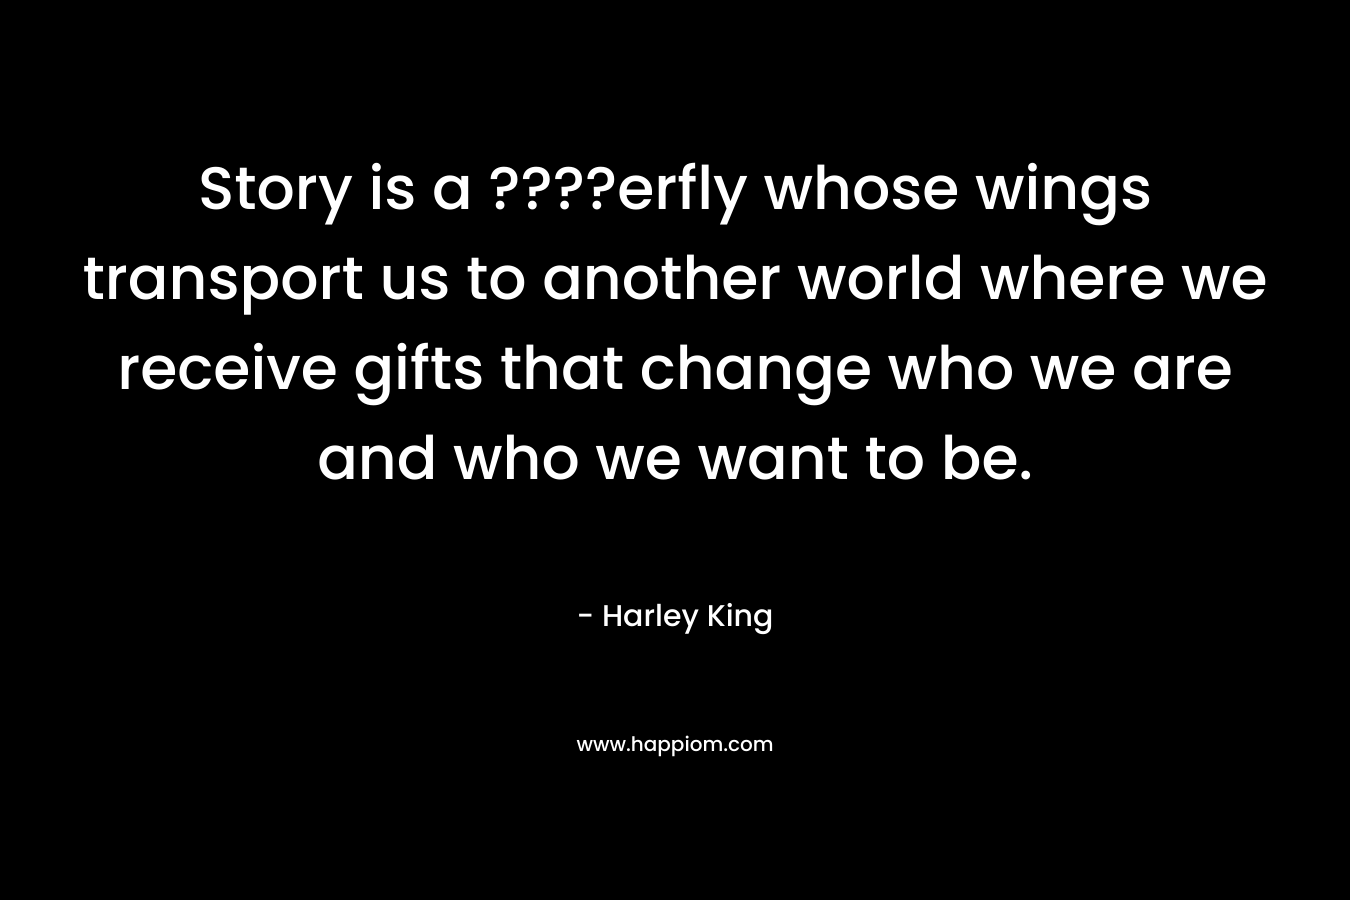 Story is a ????erfly whose wings transport us to another world where we receive gifts that change who we are and who we want to be. – Harley King